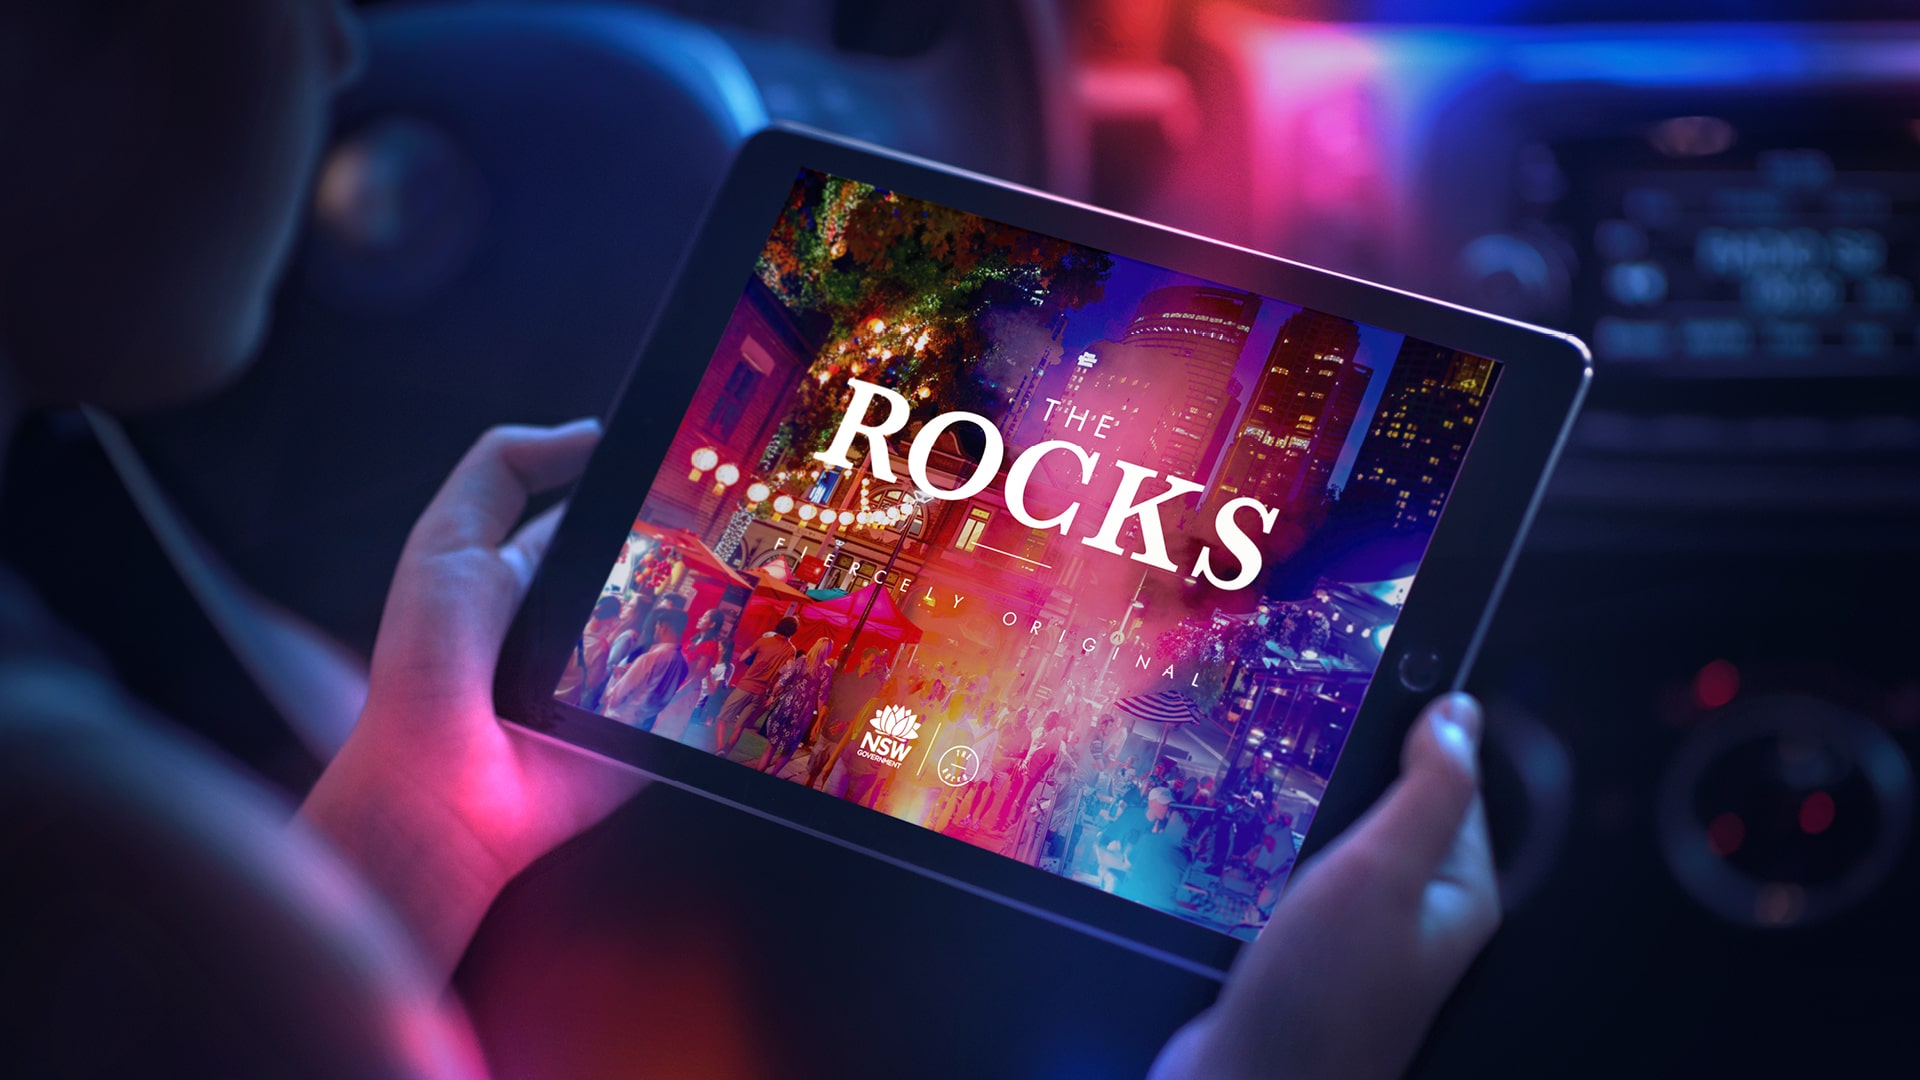 The Rocks creative being viewed on a tablet